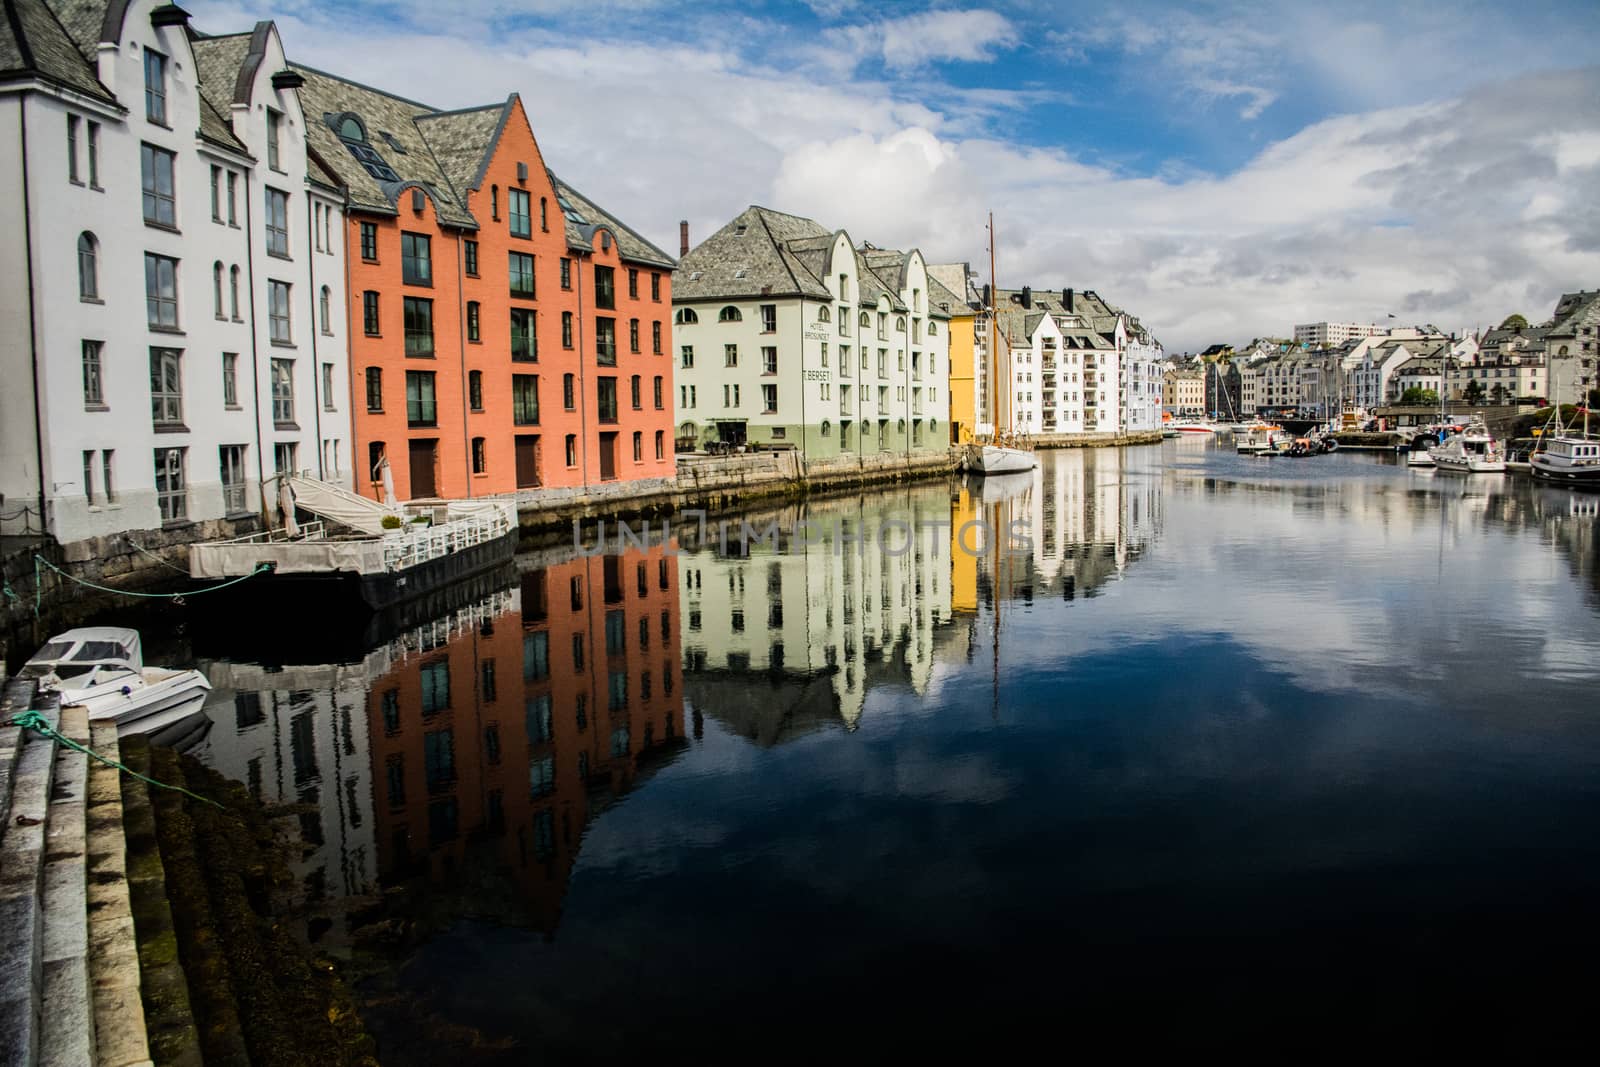 historical houses on the canal of the city of Alesund, Norway by kb79